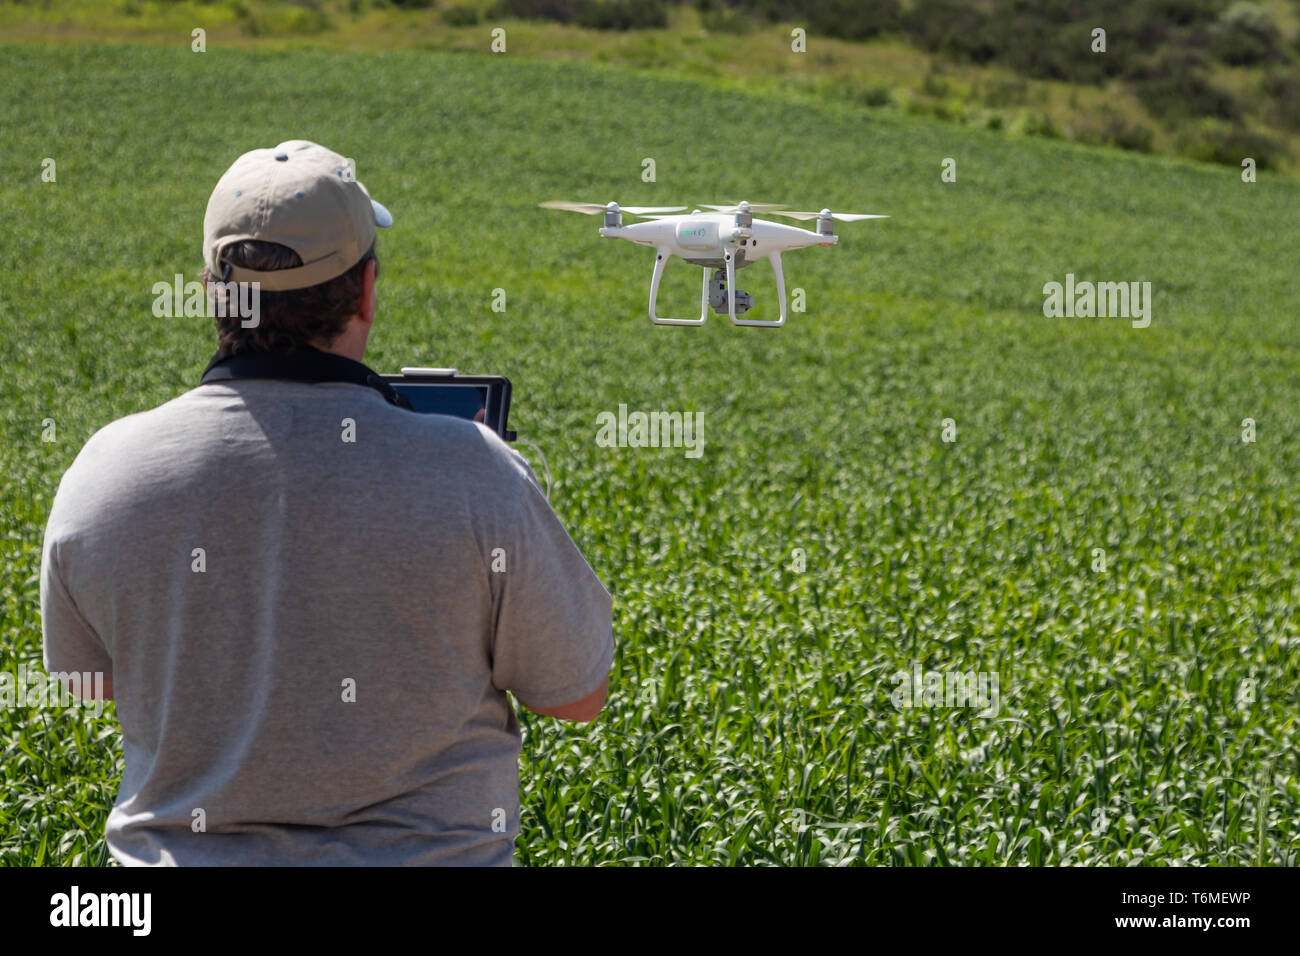 UAV Drone Pilot Flying and Gathering Data Over Country Farm Land. Stock Photo